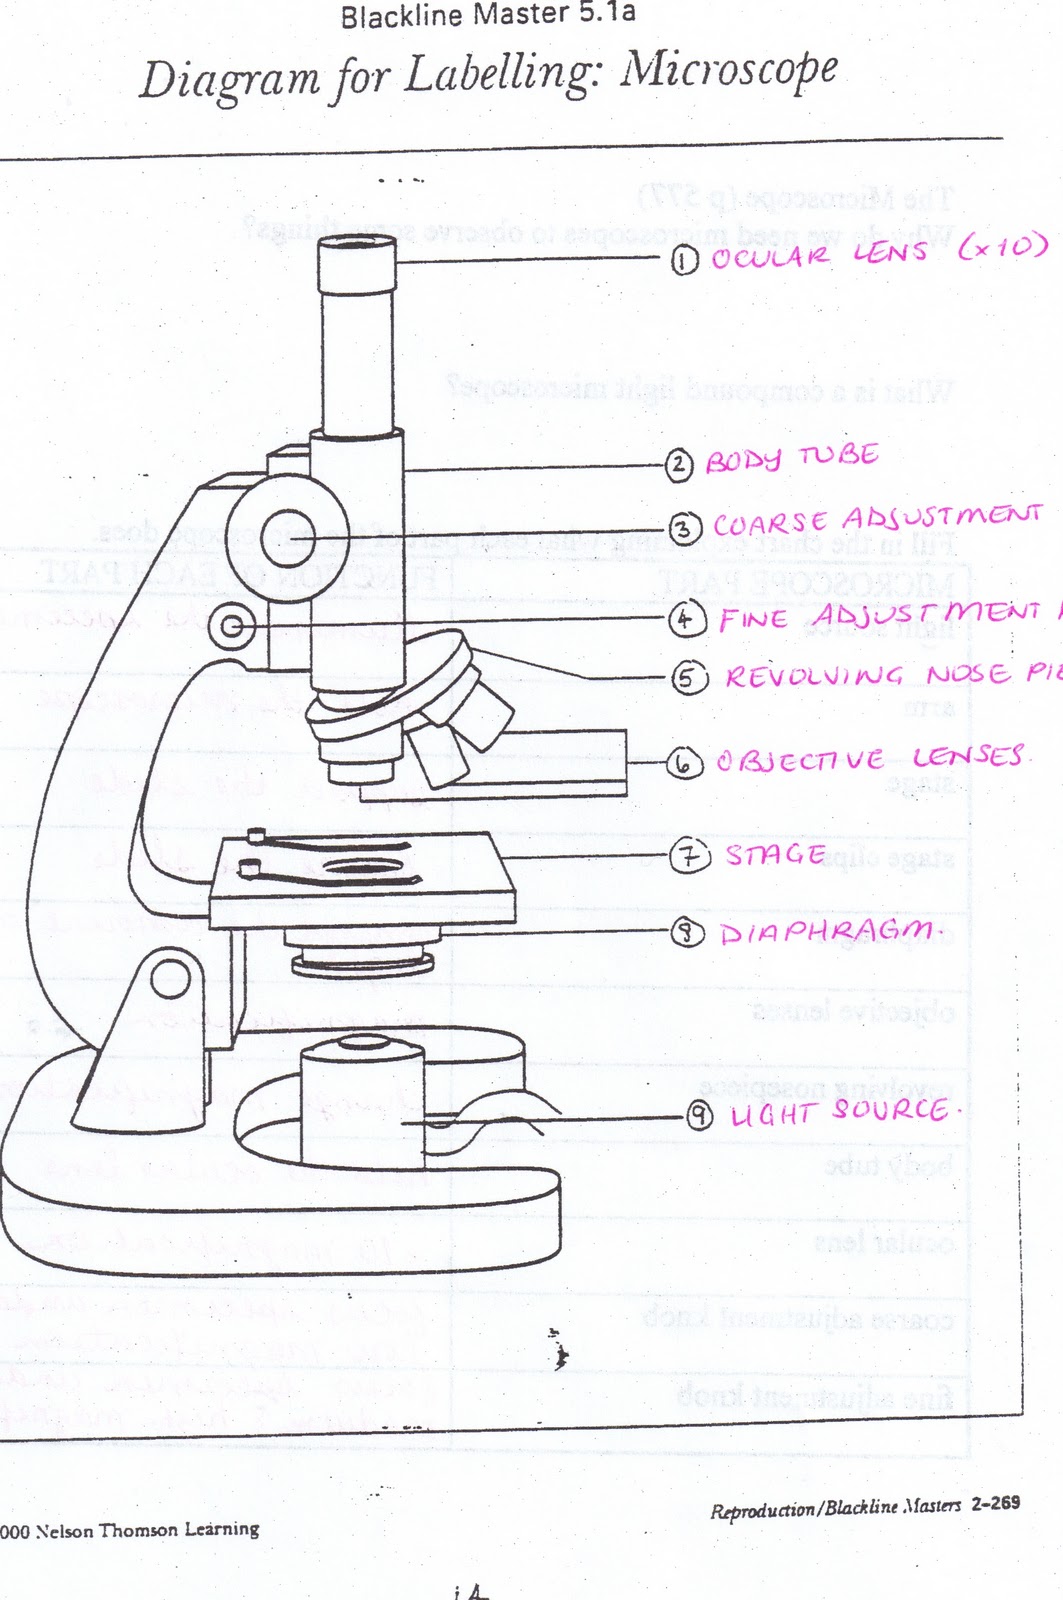 Microscope Drawing Worksheets | Made By Teachers